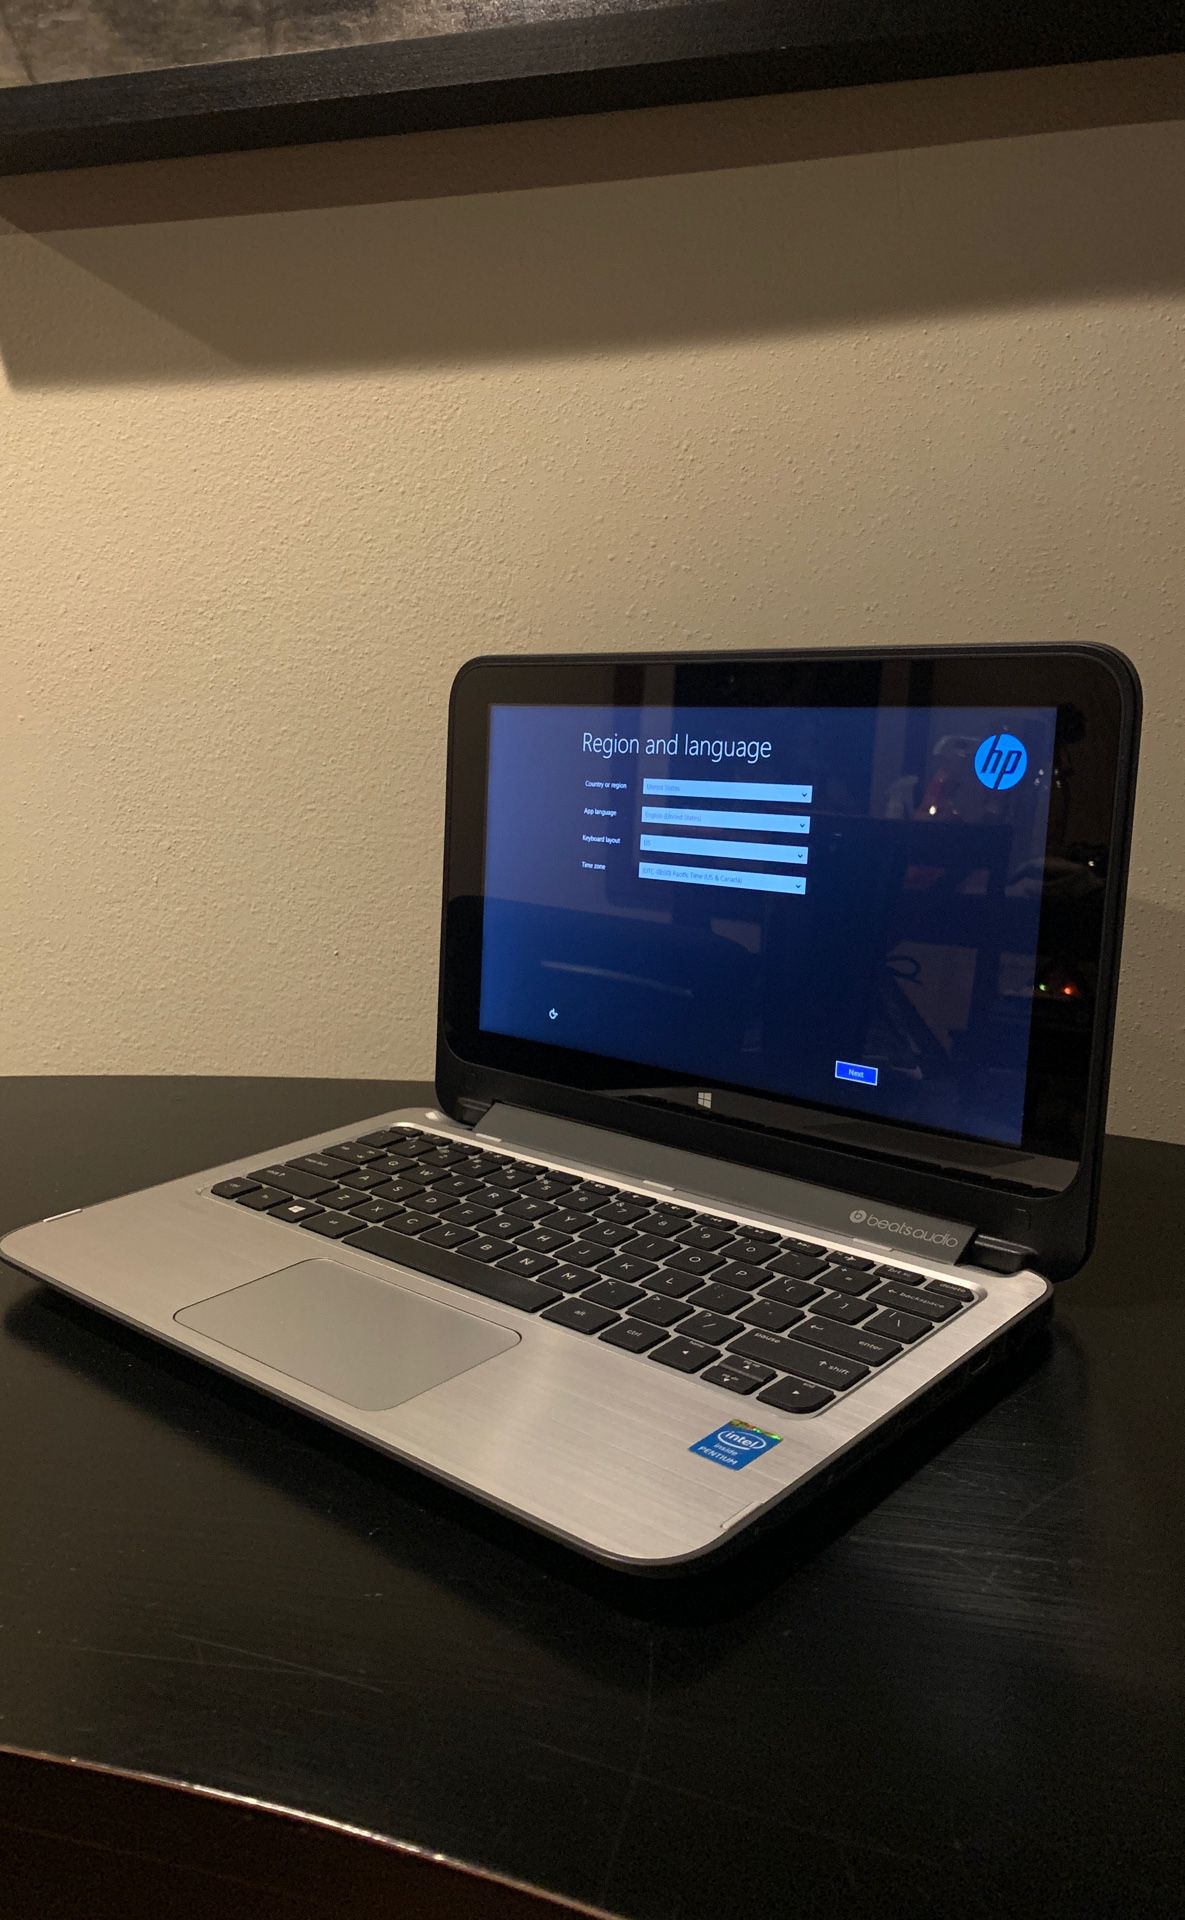 HP Pavilion 2 in 1 Laptop/ Tablet computer with Beats Audio. Like new condition!